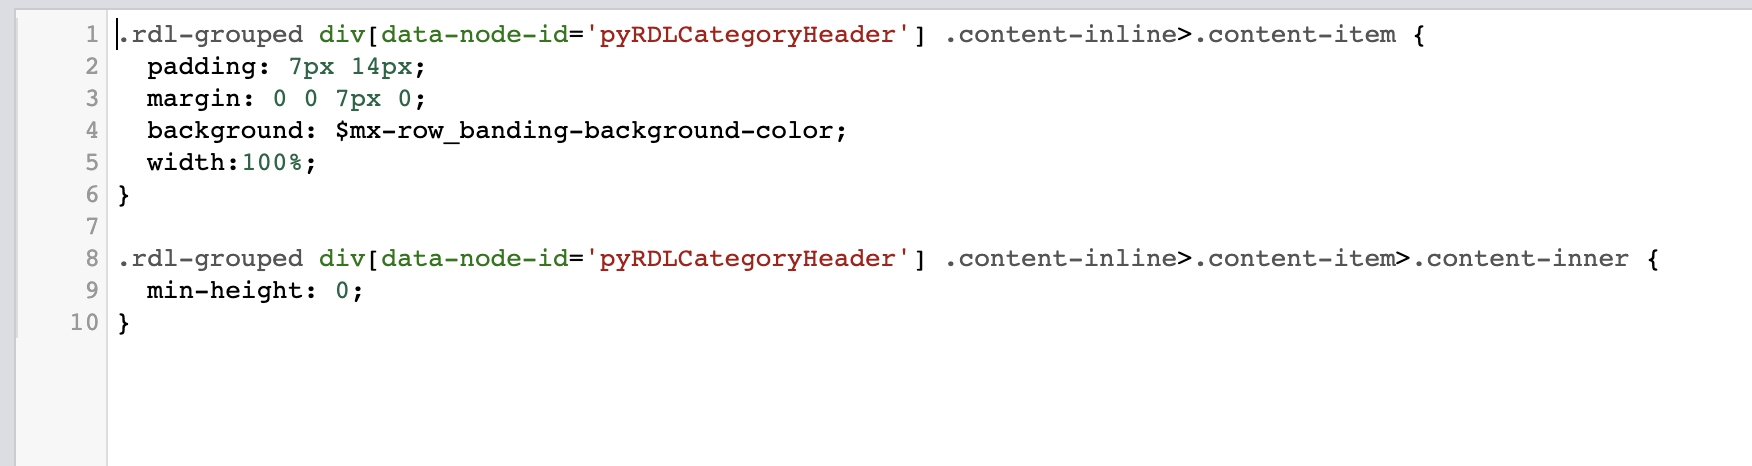 CSS content to add background for grouped row